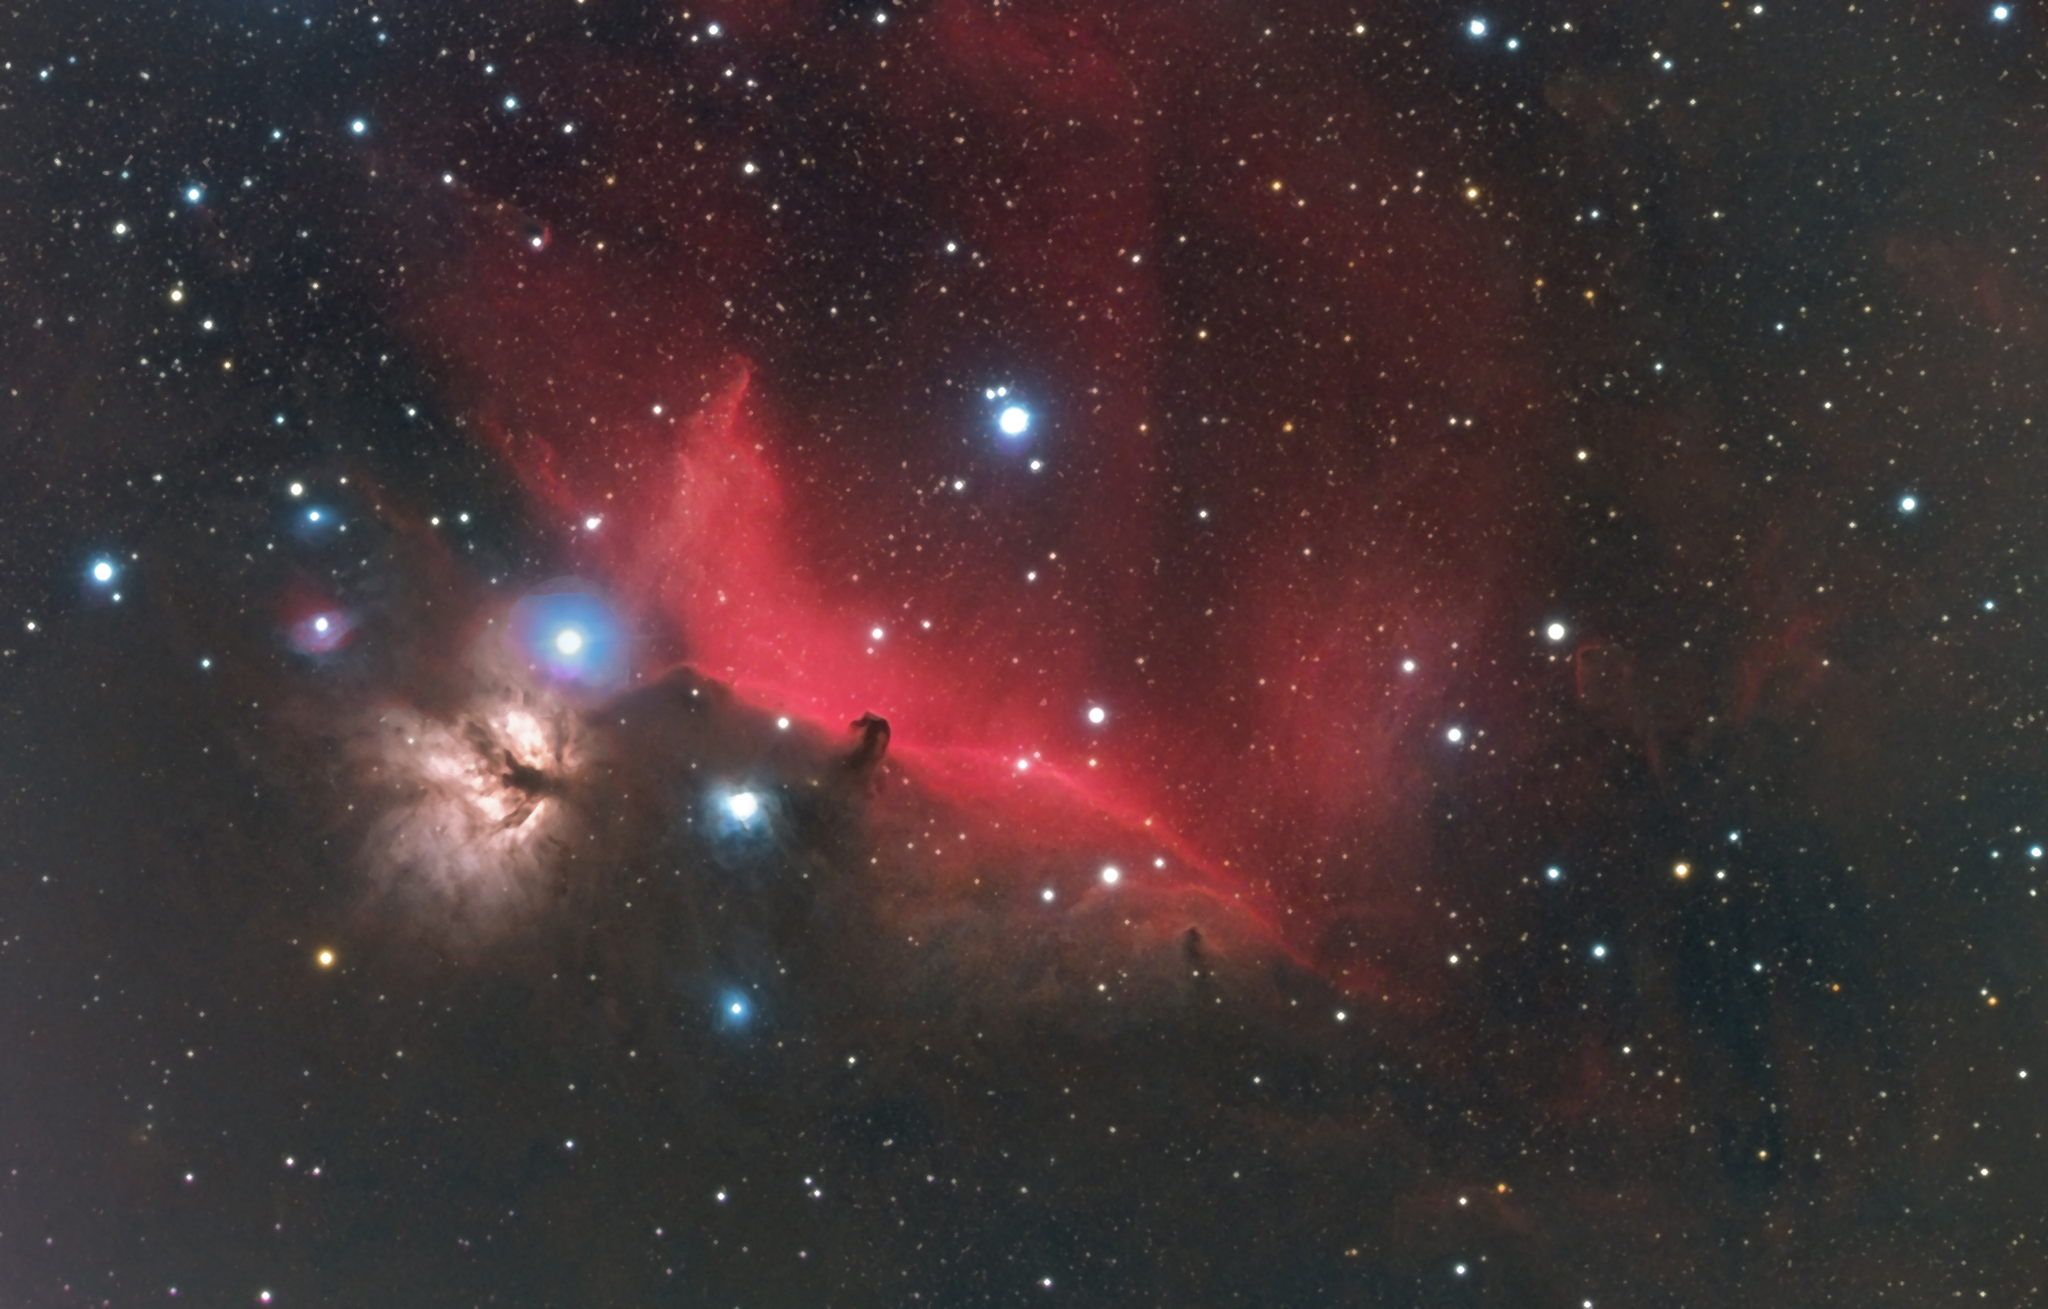 Flame and Horsehead Nebulae in Orion